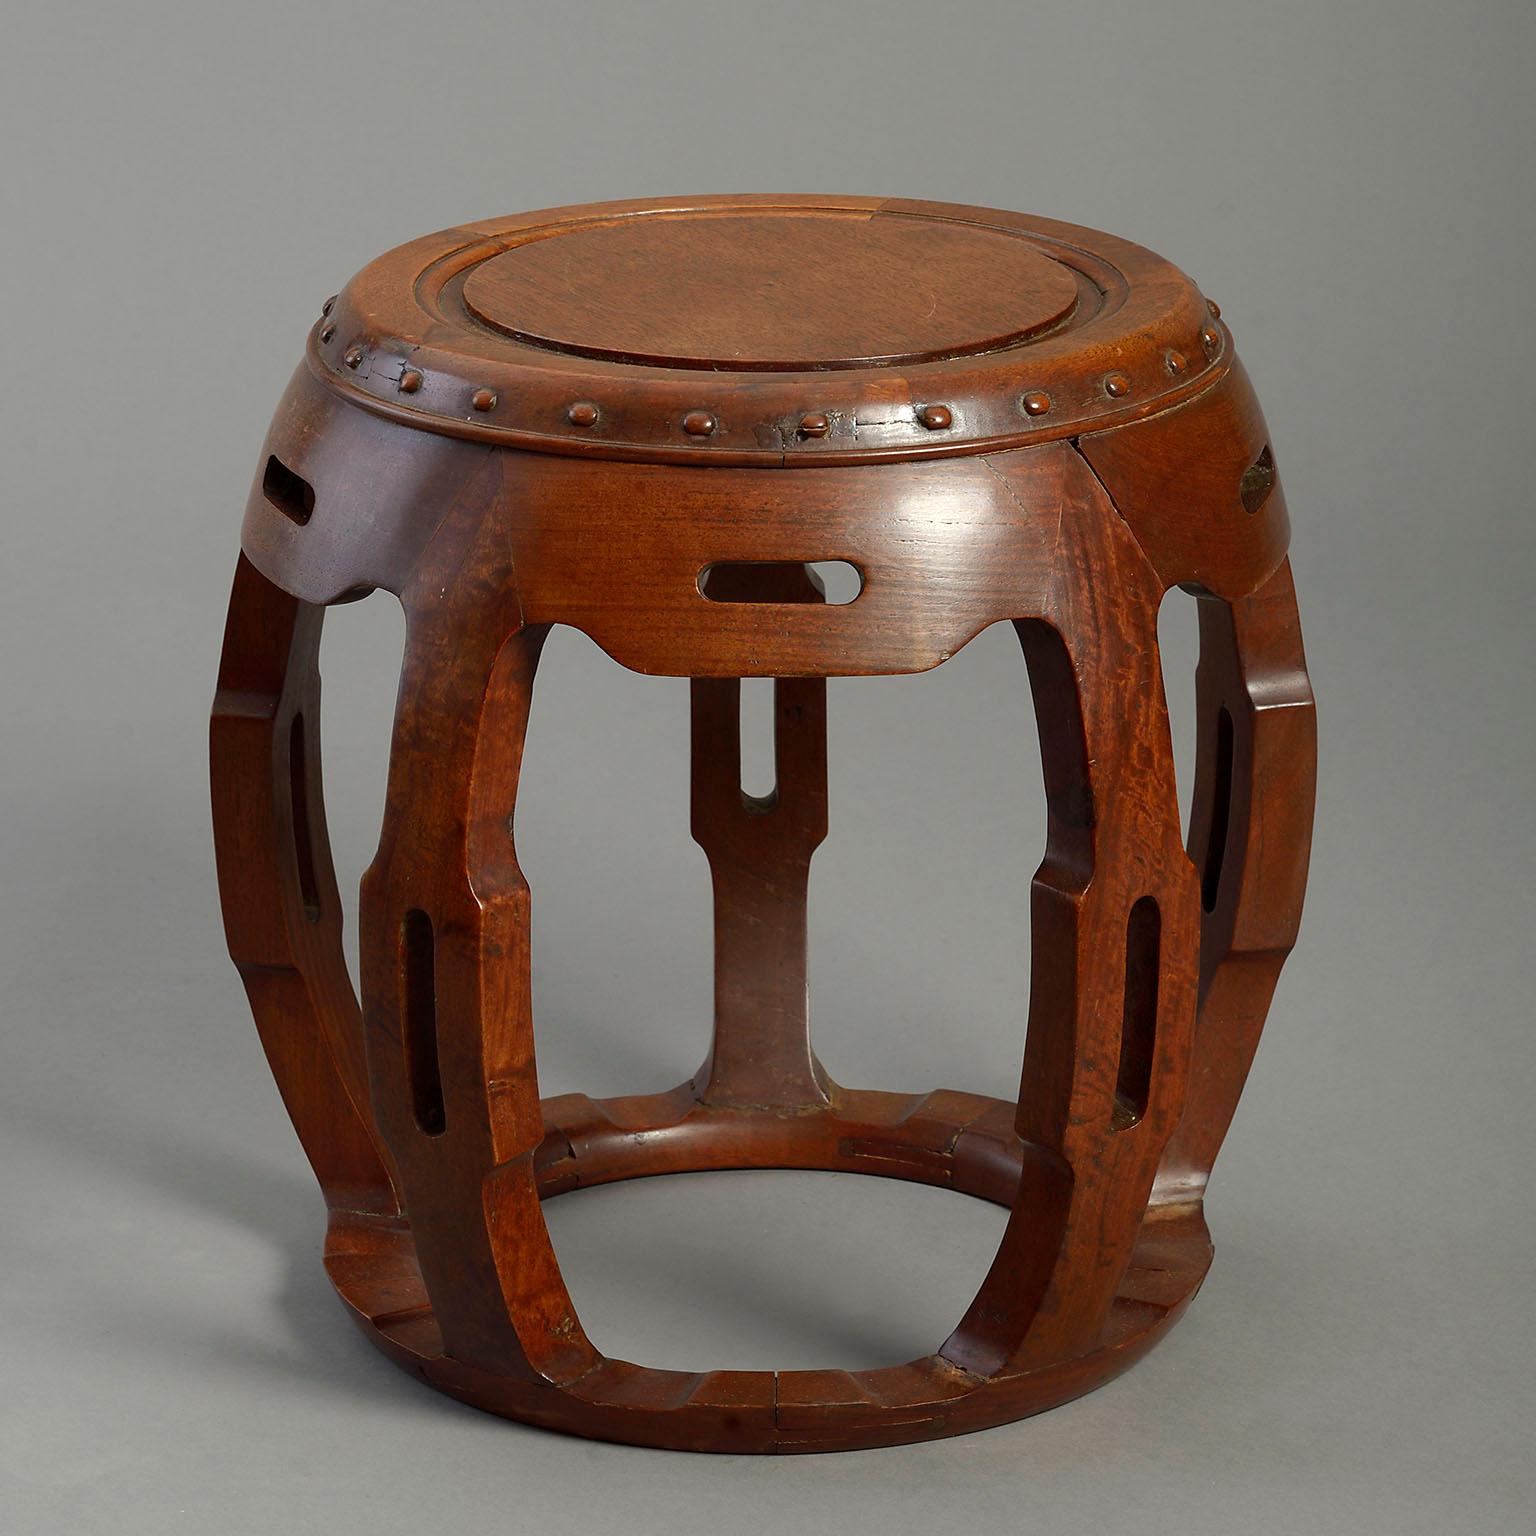 Chinese Export Early 20th Century Hardwood Barrel Stool or Low Table